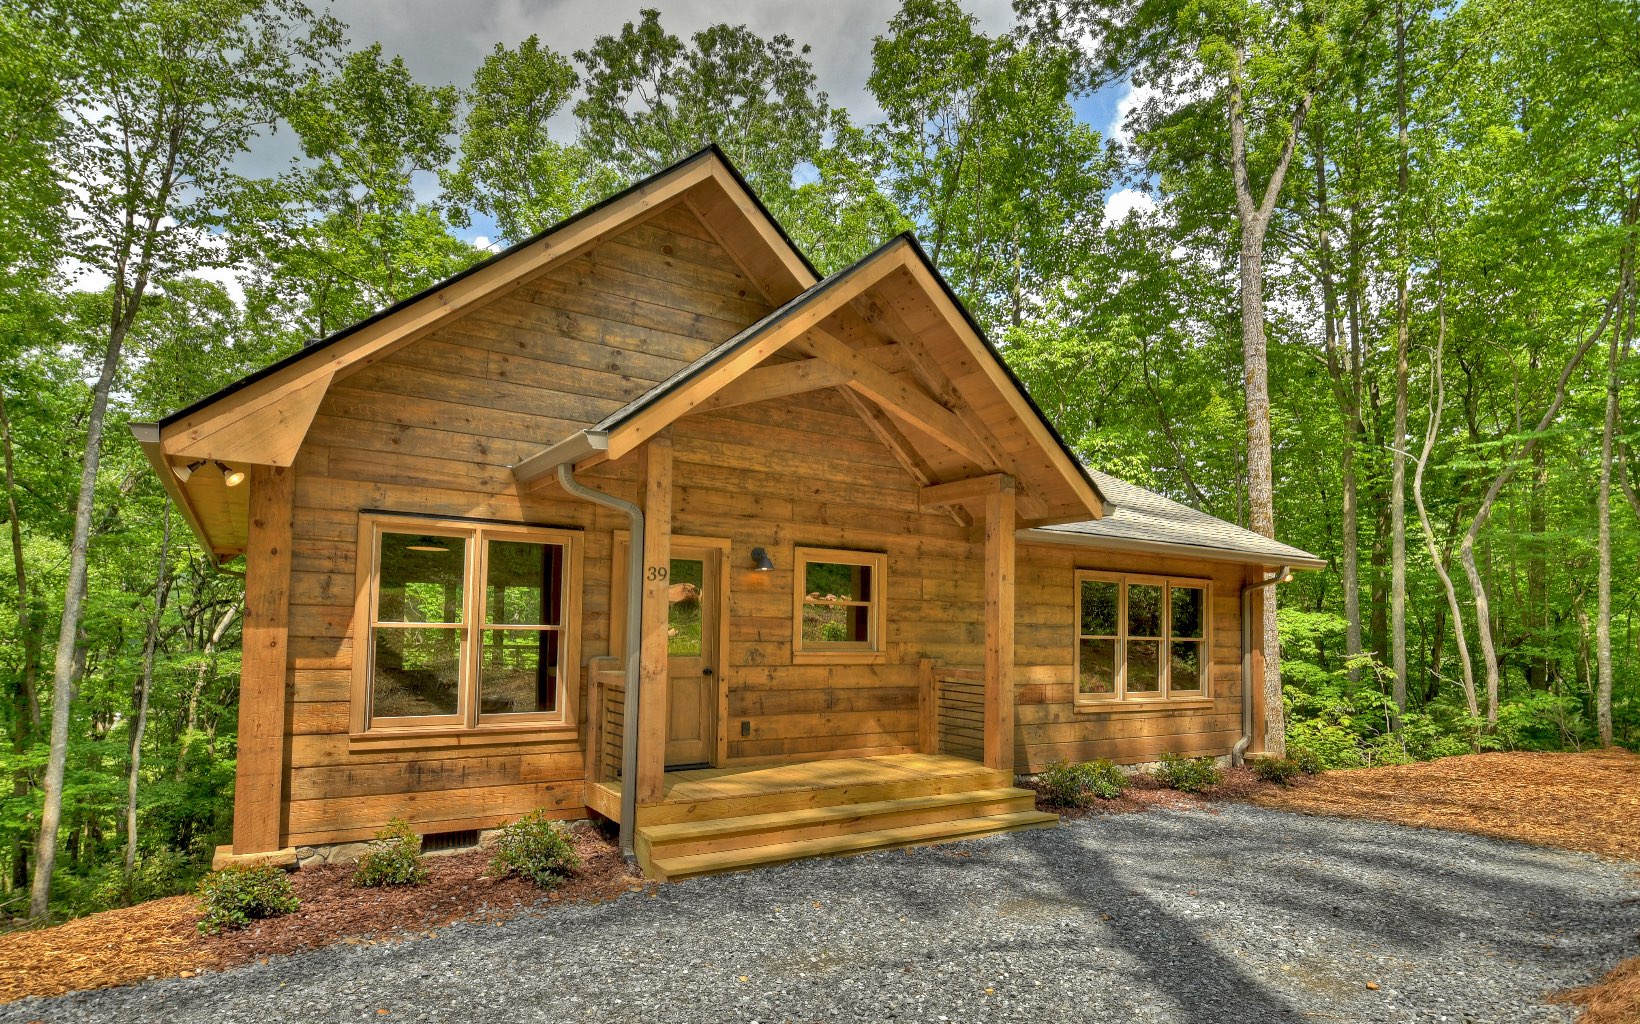 Looking for peace and quiet...look no further than this stunning timber frame and log cabin with trail to a pristine creek. The wide open space features a Greatroom w/timber frame beams open to dining area and kitchen, 2 full baths & wood floors throughout. You'll love the beamed, covered porch where you can listen to the rapids of the creek. Mountain bikers dream!